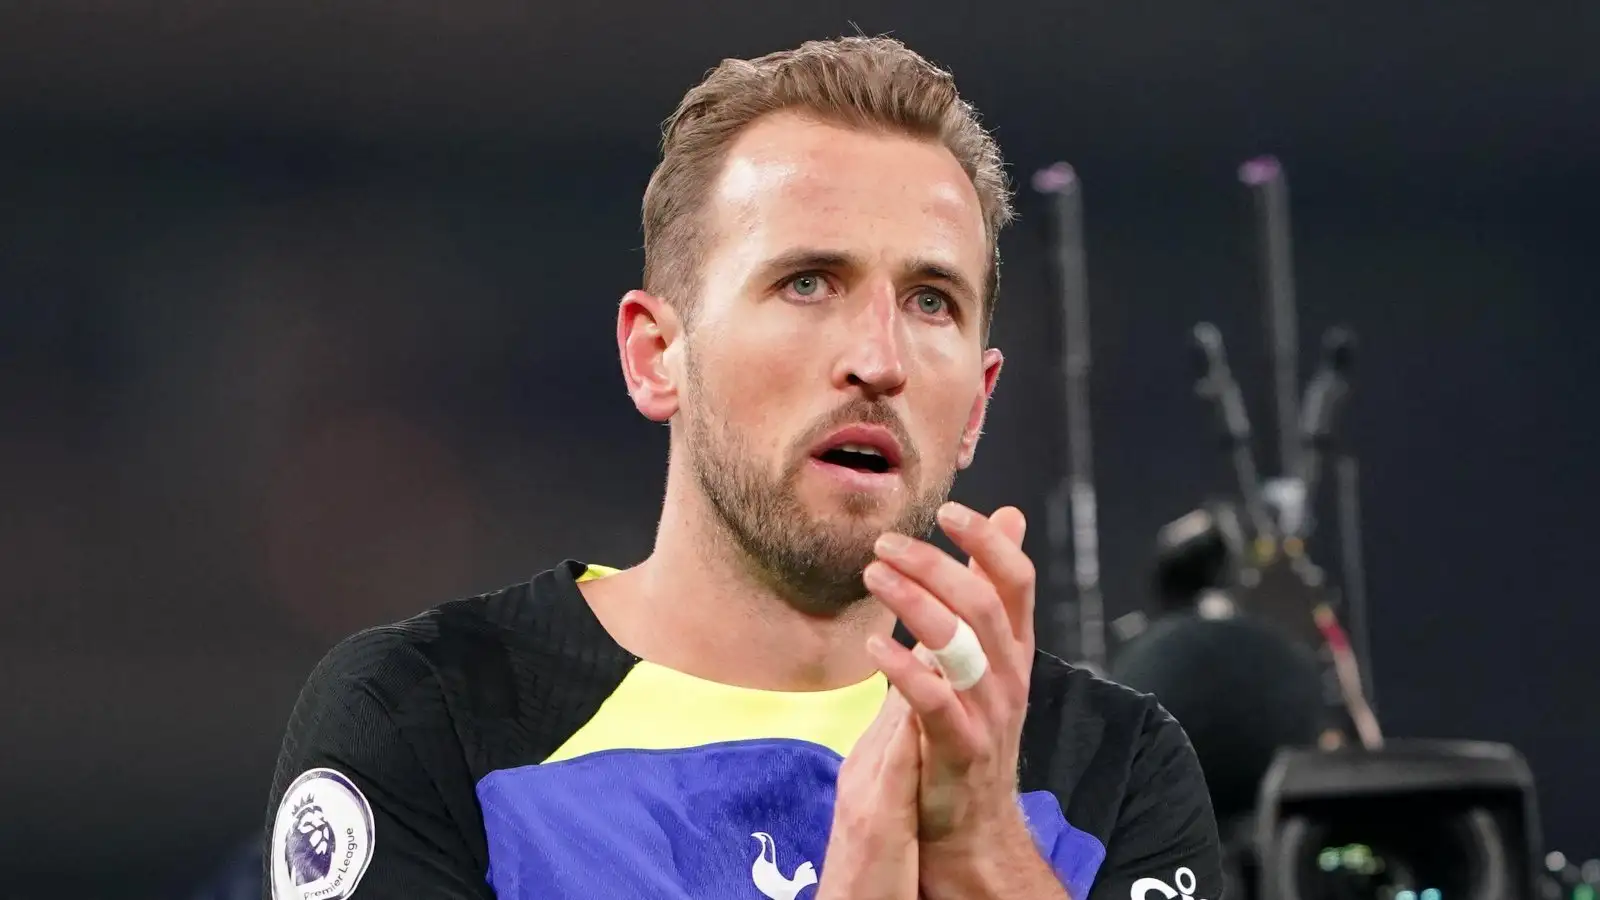 Man Utd target Harry Kane claps the supporters